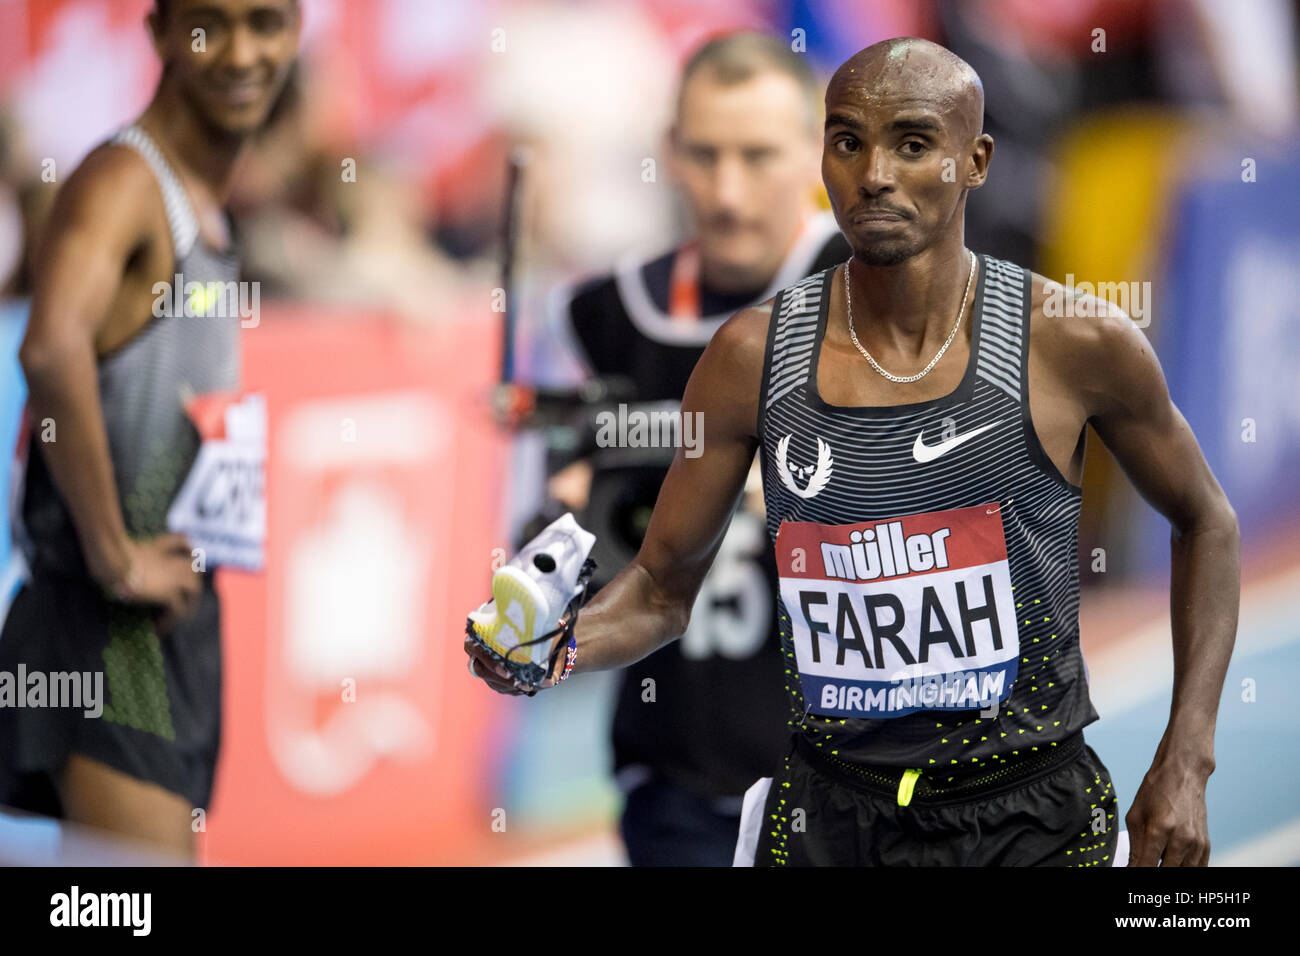 Birmingham, UK. 18th Feb, 2017. Mo Farah reacts after winning the 5000m at the Muller Indoor Grand Prix Birmingham at the NIA, Birmingham, UK, on 18 February 2017. Credit: Andrew Peat/Alamy Live News Stock Photo